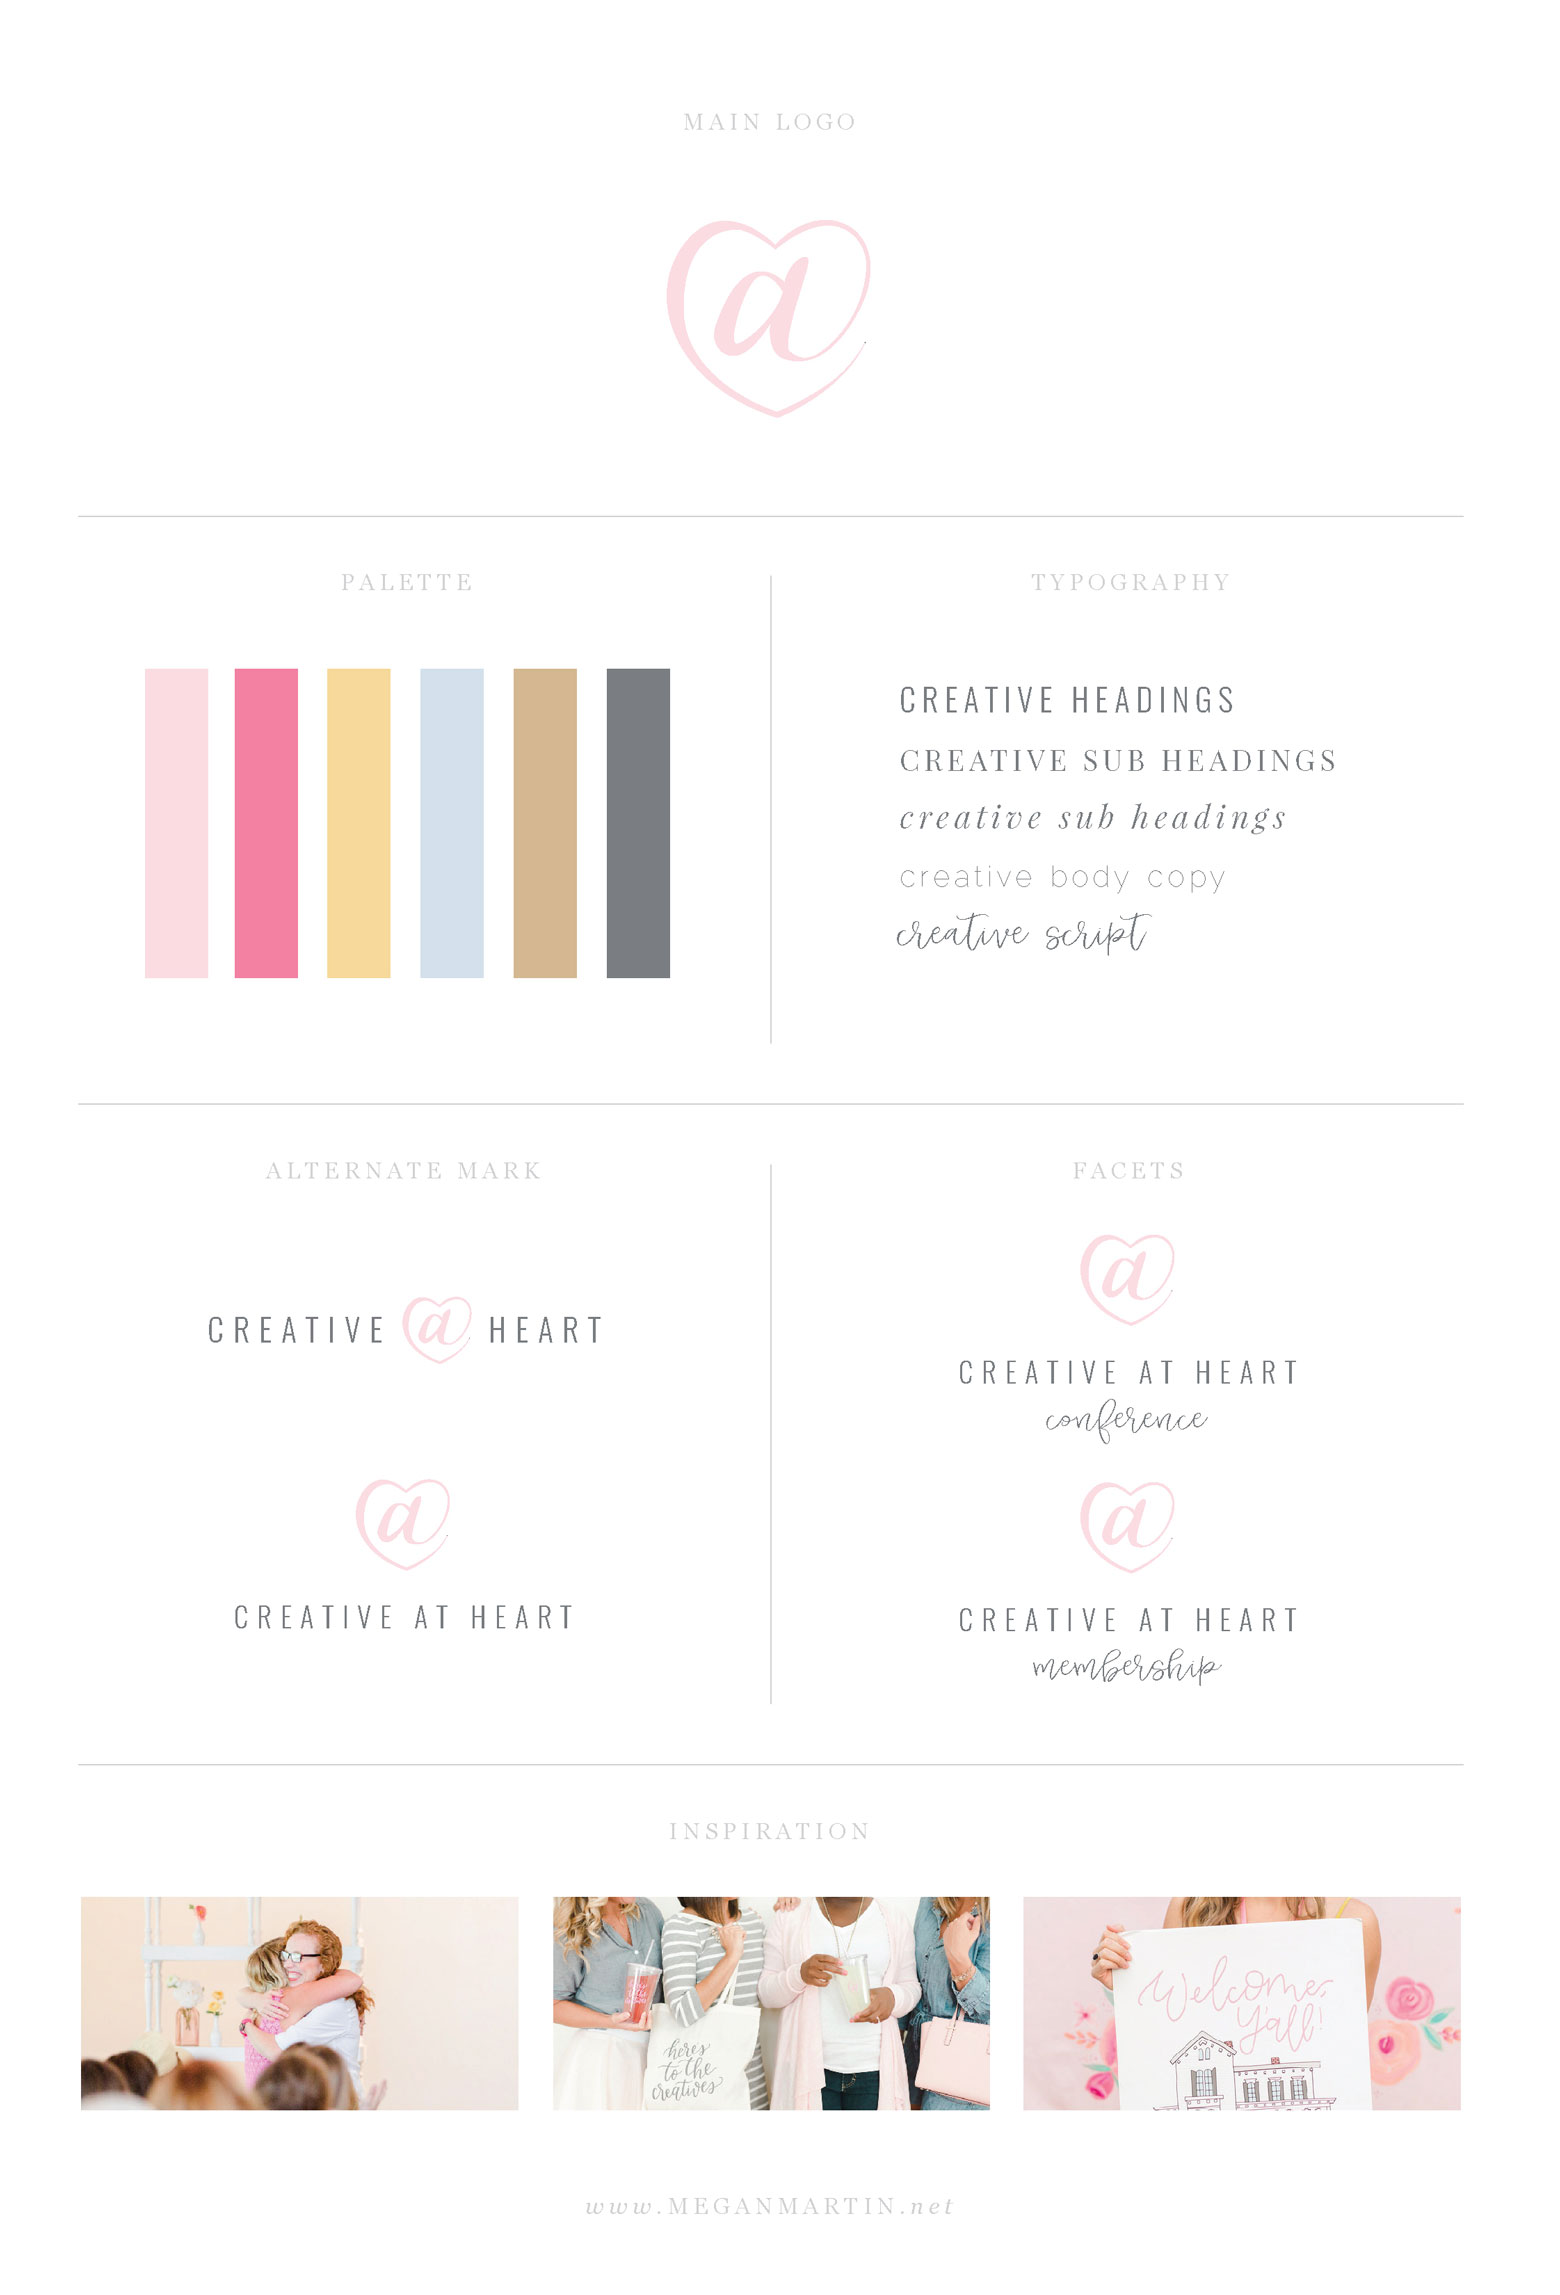 Creative at Heart Conference, showit website design, showit template, showit website template, showit 5, branding, mood board, brand board, business, color